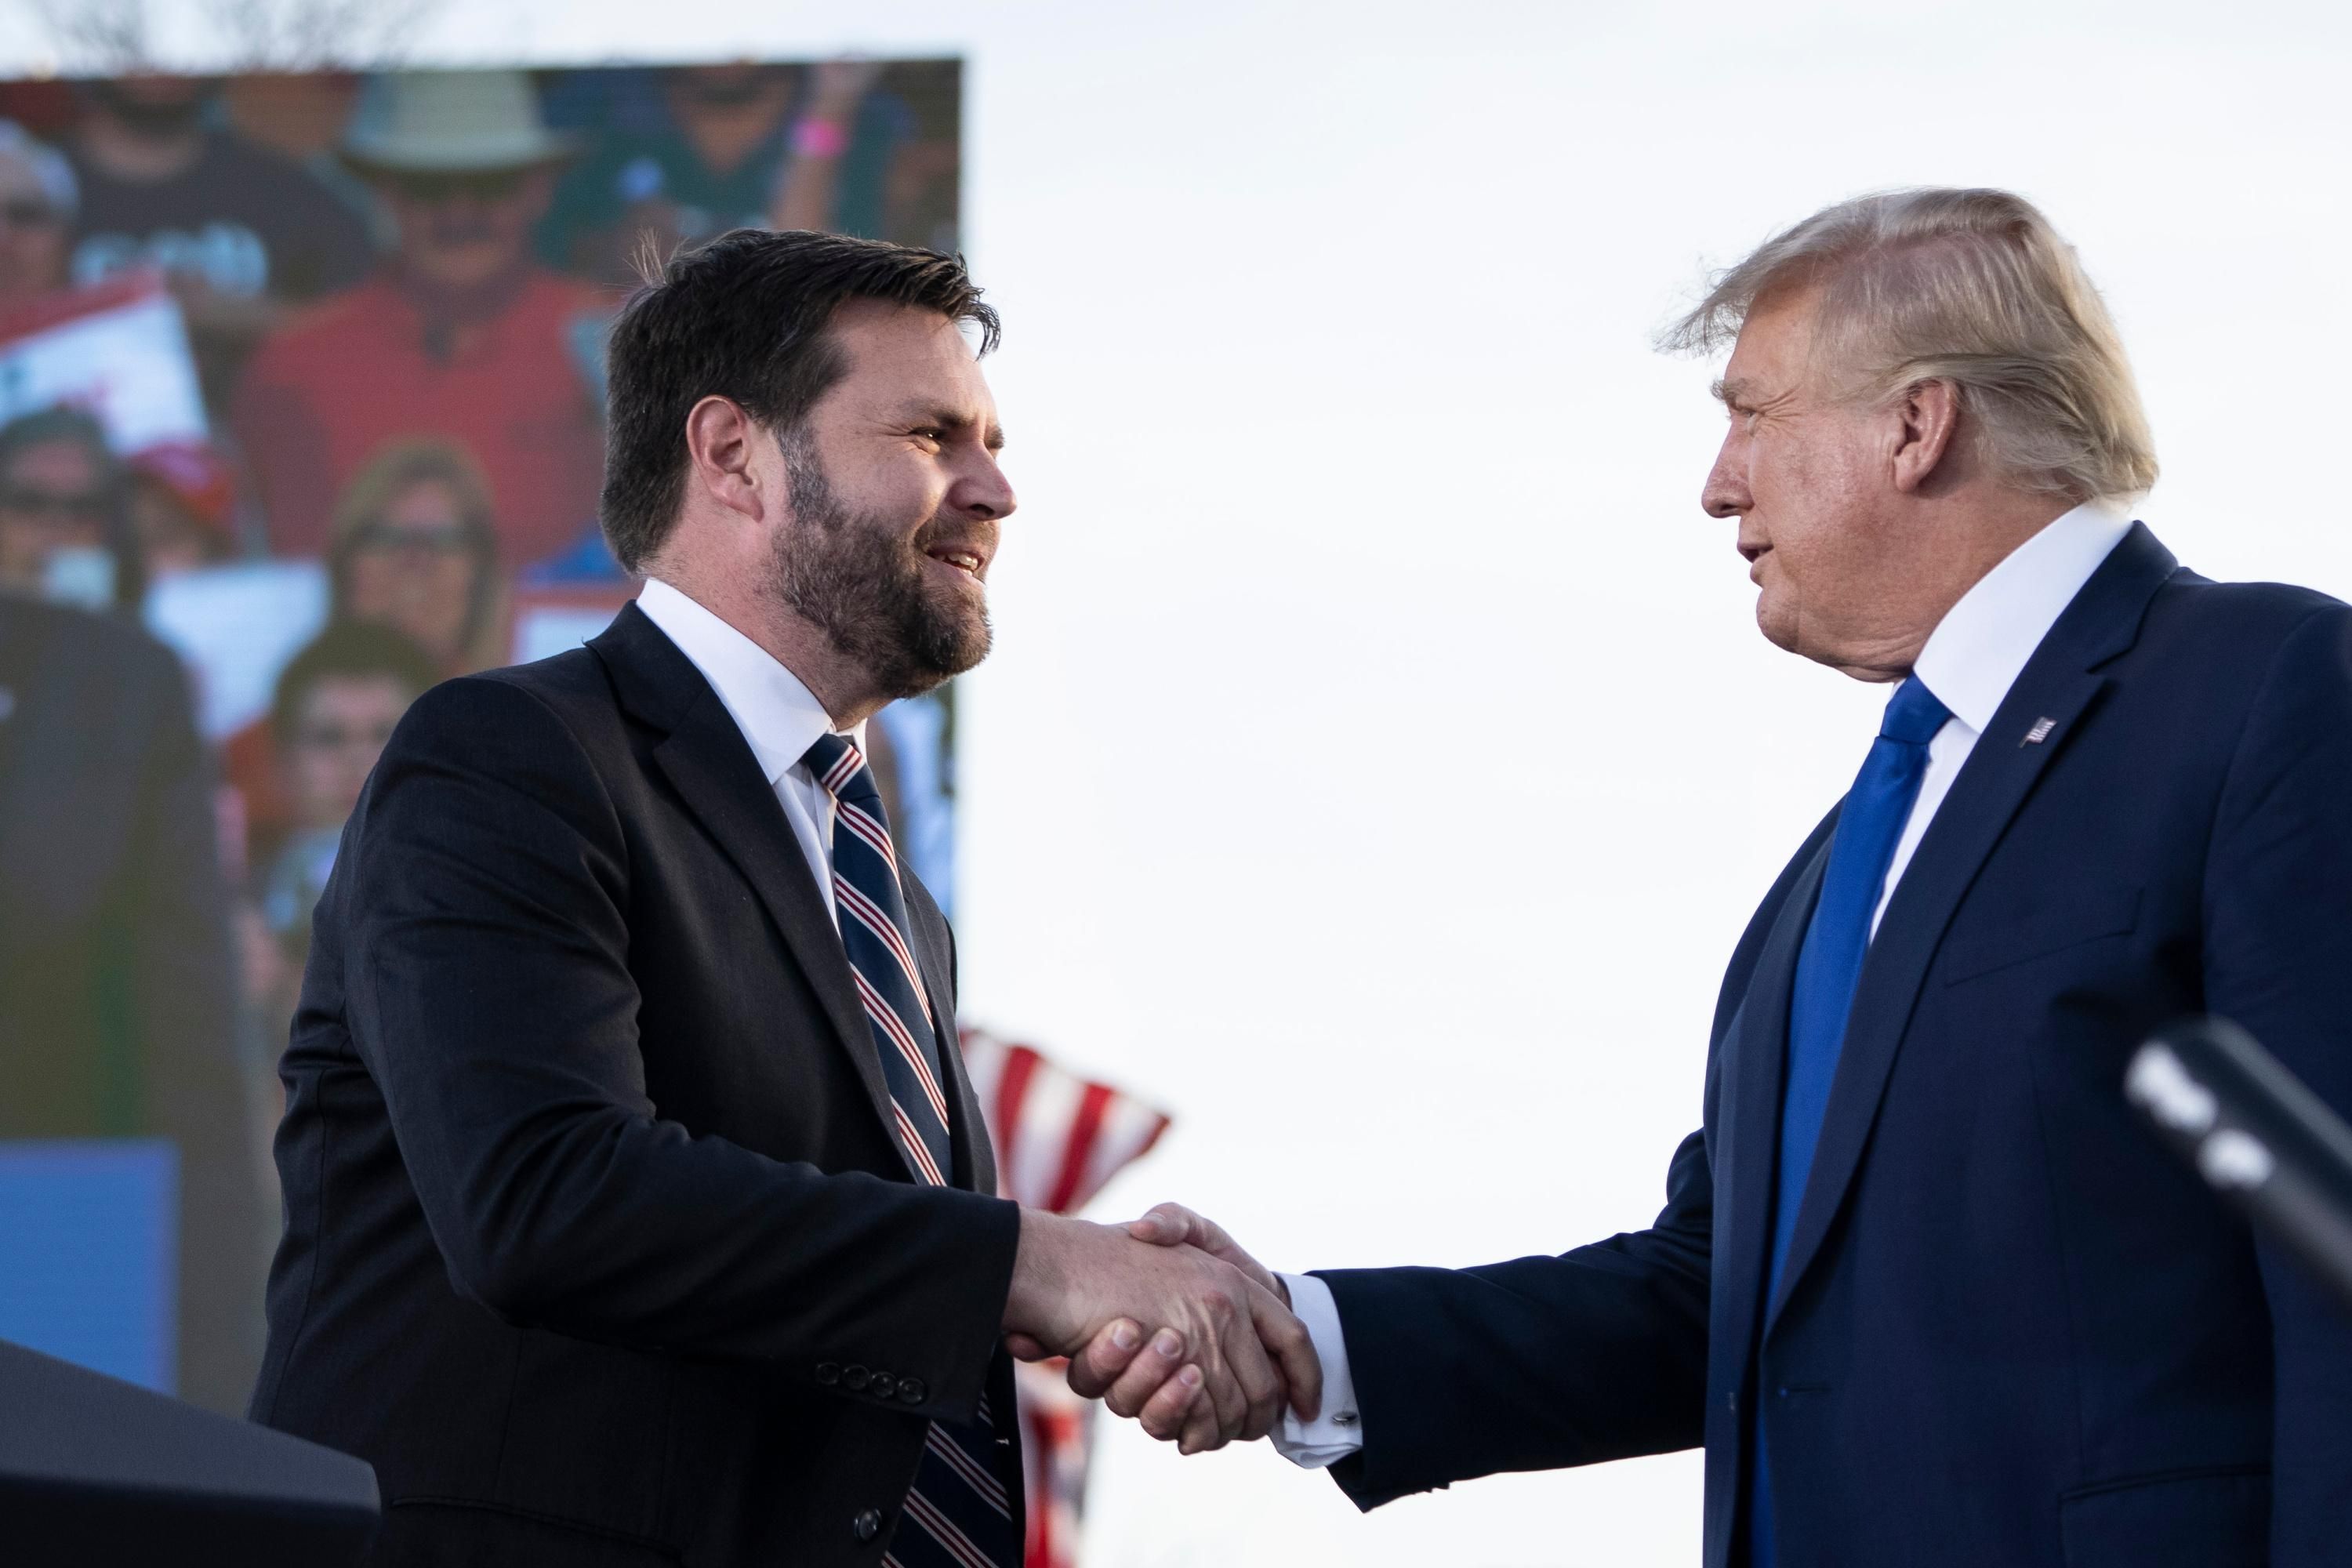 JD Vance shakes hands with Donald Trump